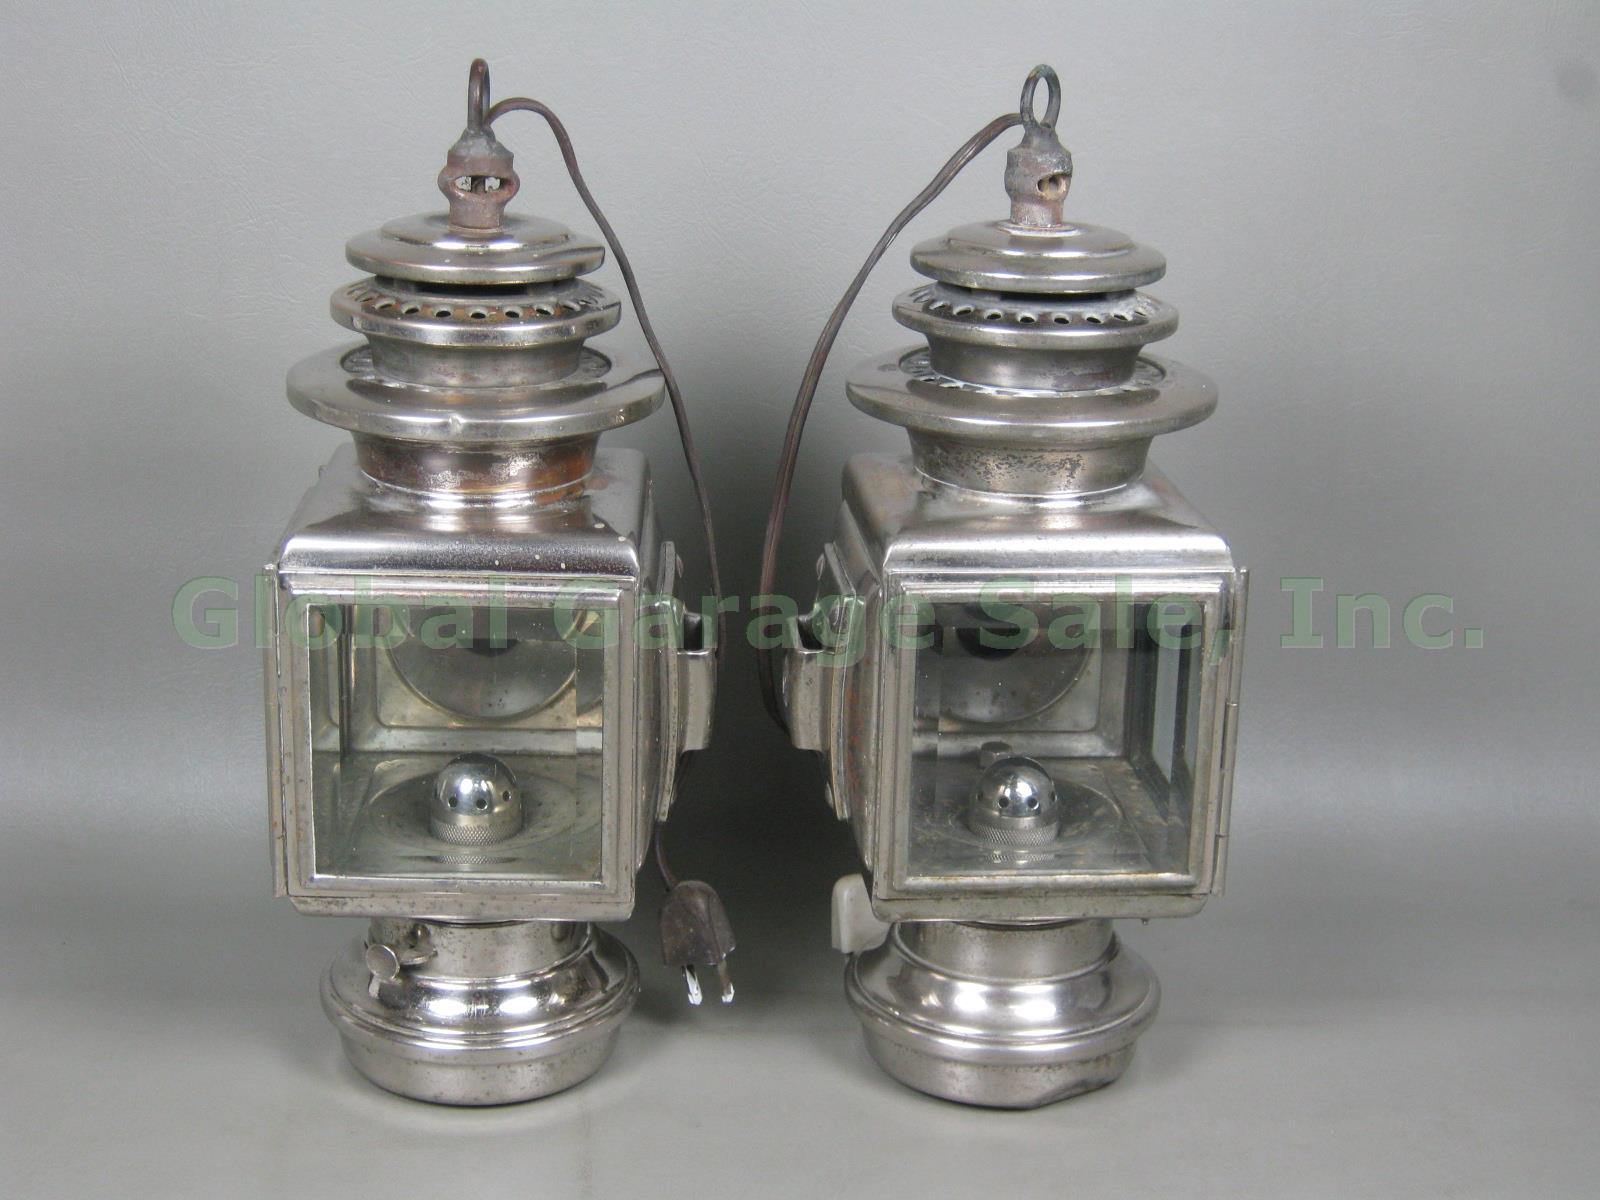 2 Antique CM Hall Carriage Headlights Lights Lamps Nickel Plated Electrified NR! 1